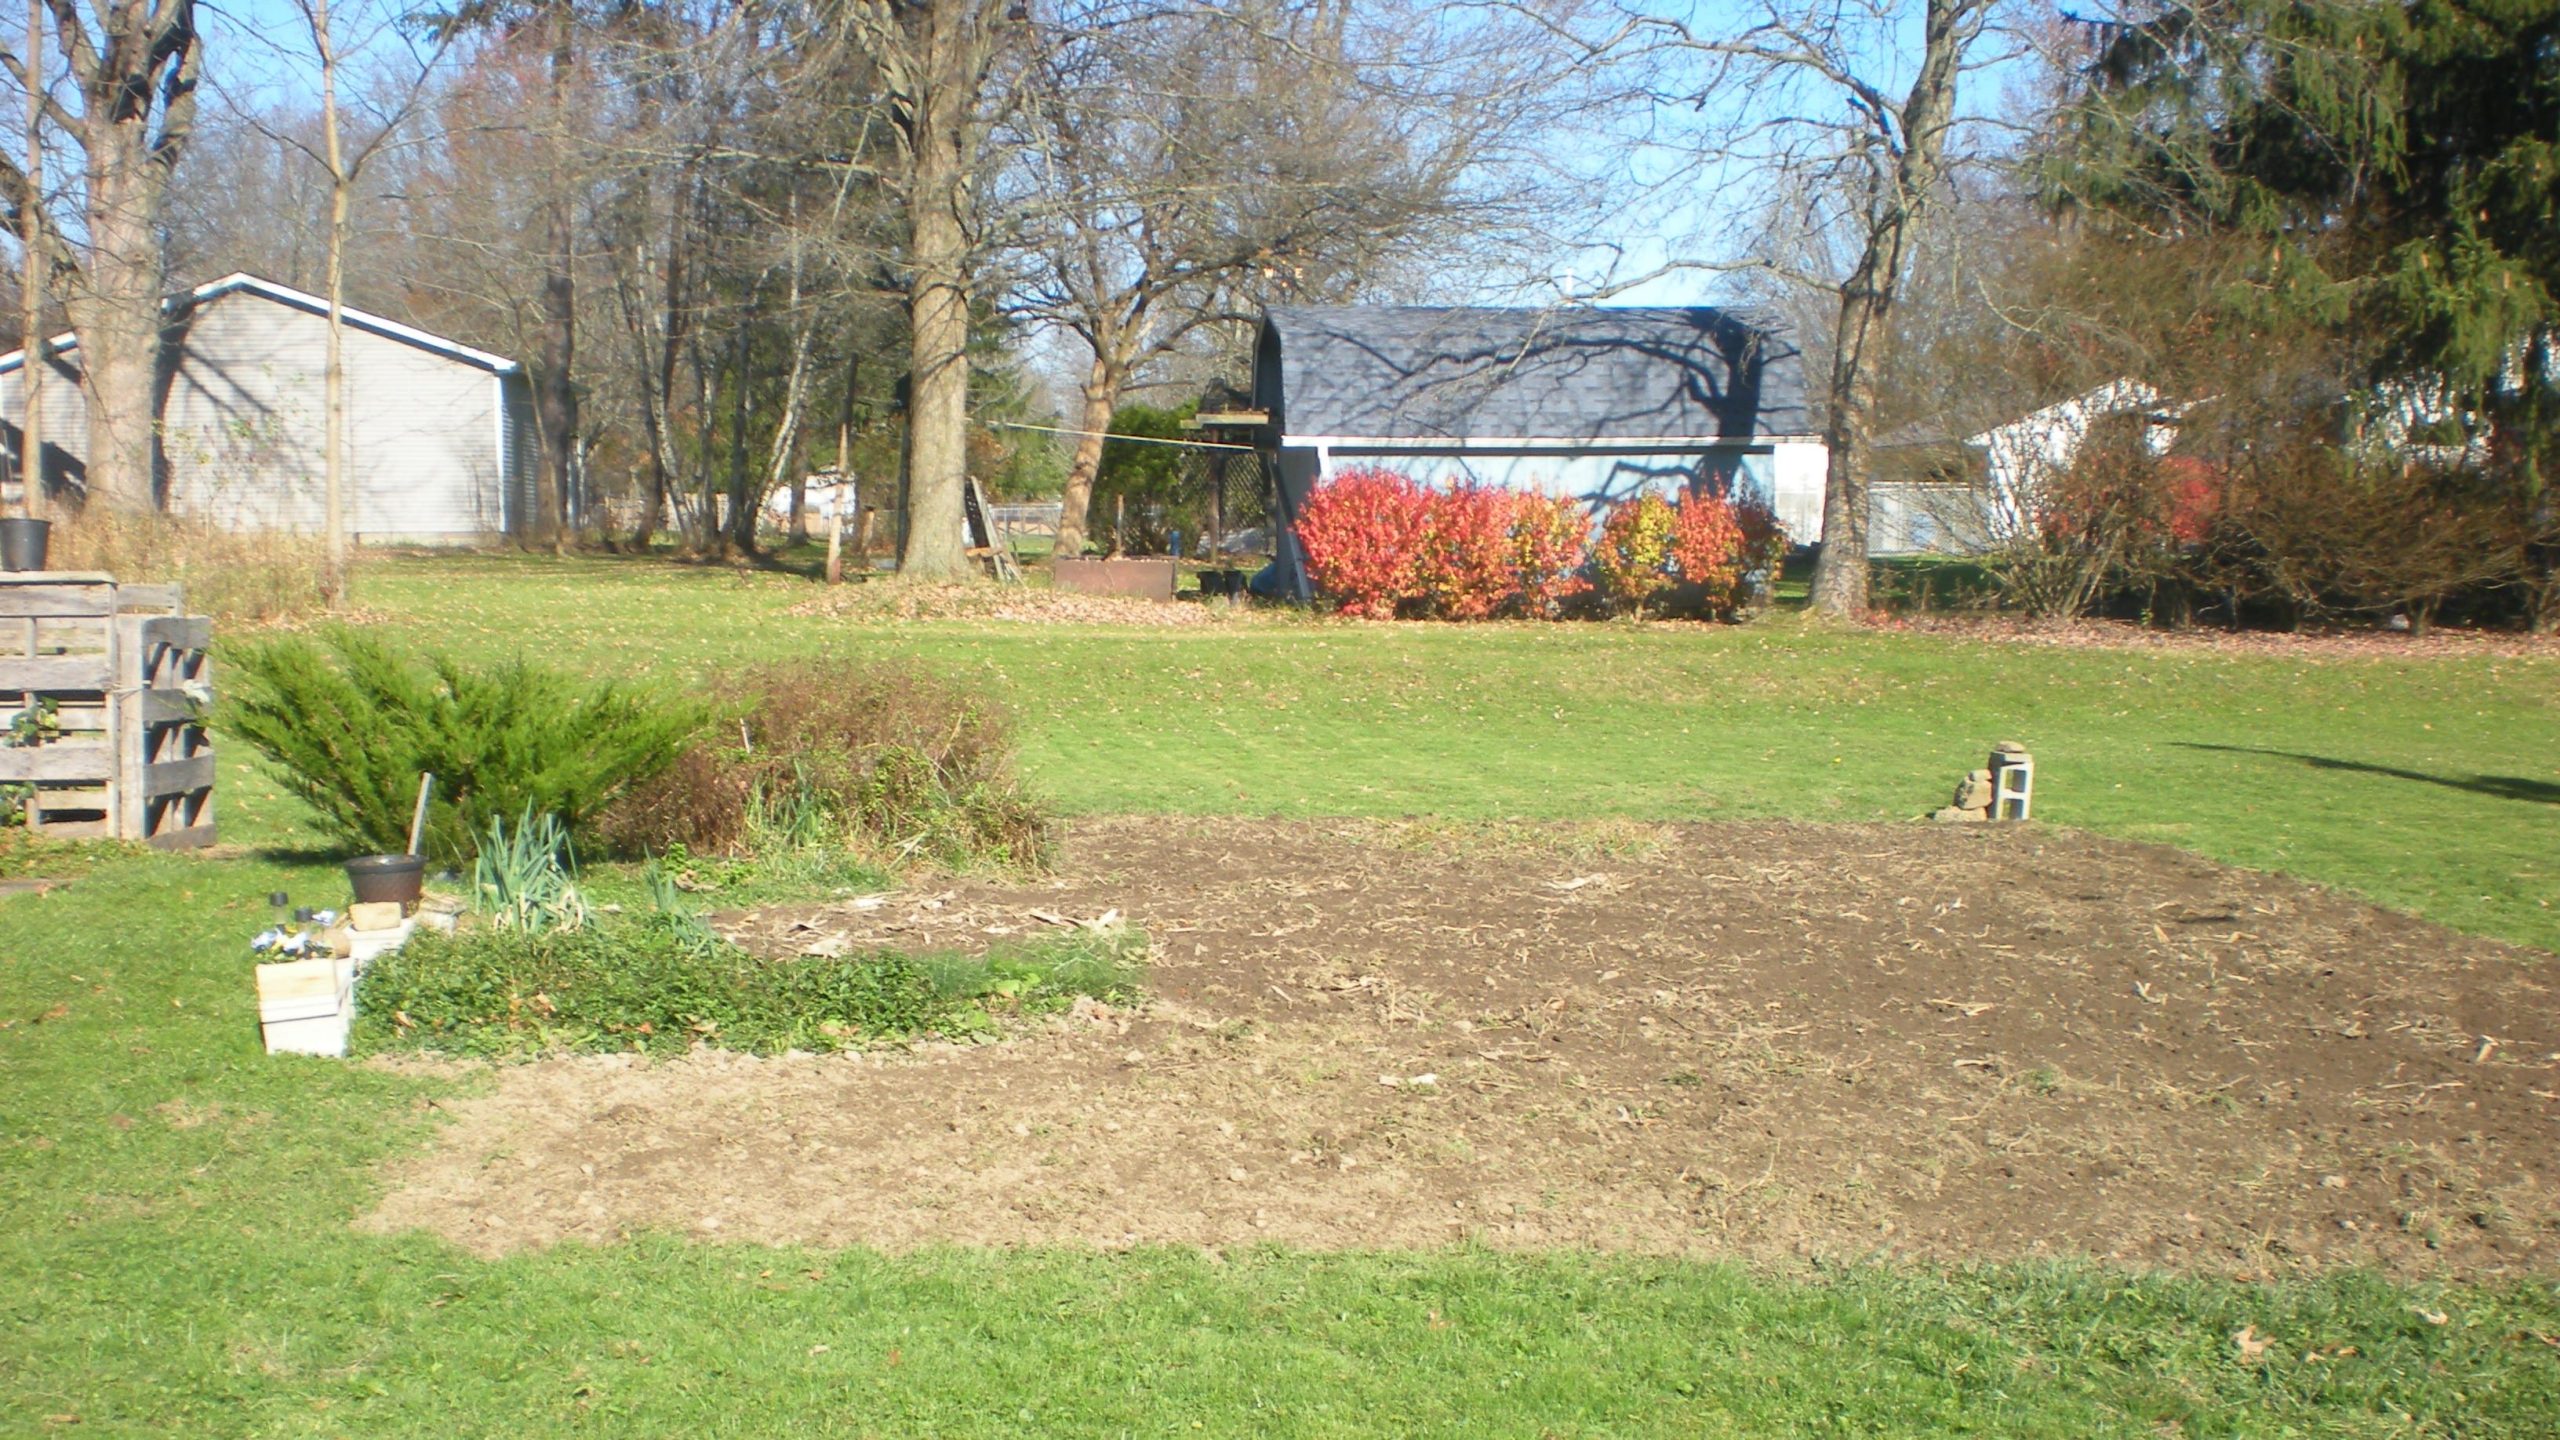 Garden after being ploughed in the second week of November, after the harvest. It is 25ft by 40ft (1,000 square feet). The ploughman (that is I) used six horses (Troy Bilt Horse Roto Tiller).